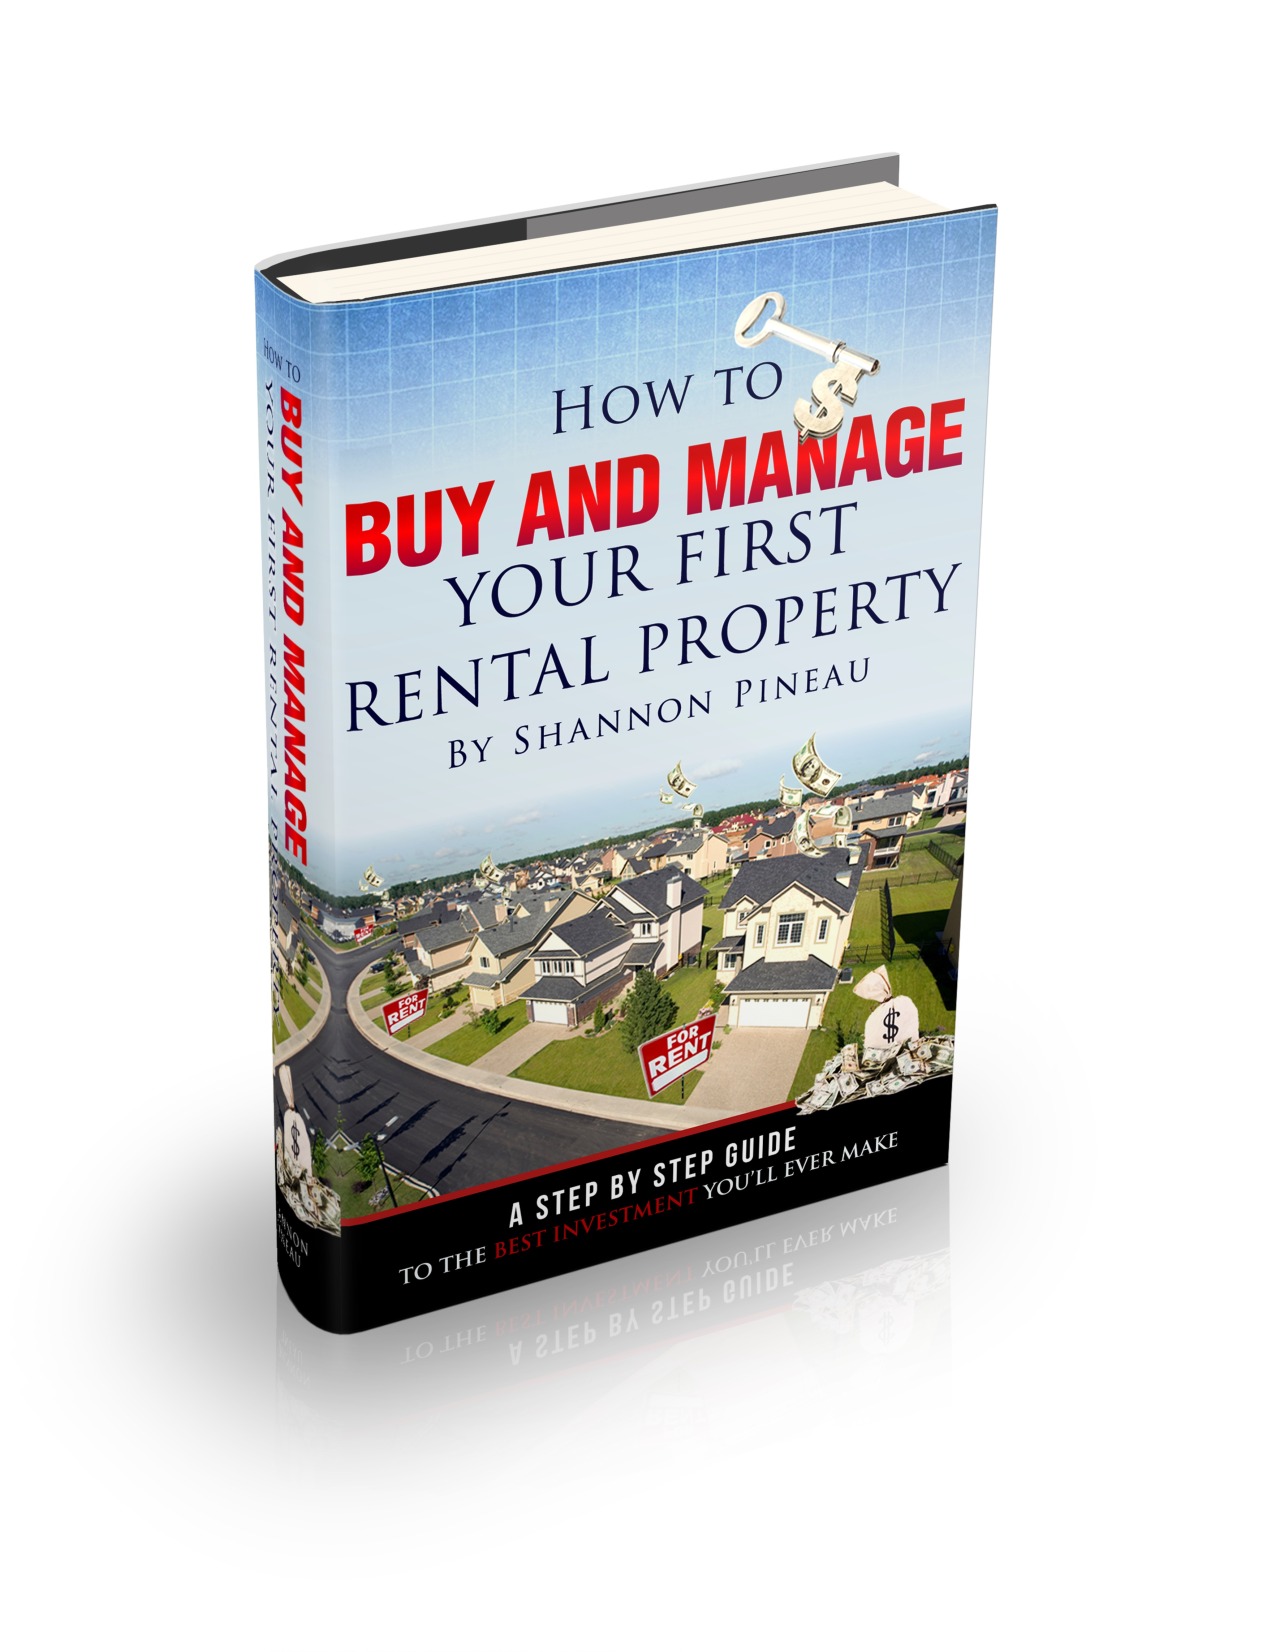 Have you been thinking about buying your first rental property but you’re not sure where to begin?Here is a step by step guide for the beginner real estate investor and new landlord!
From my own experience as a landlord, I have included everything...